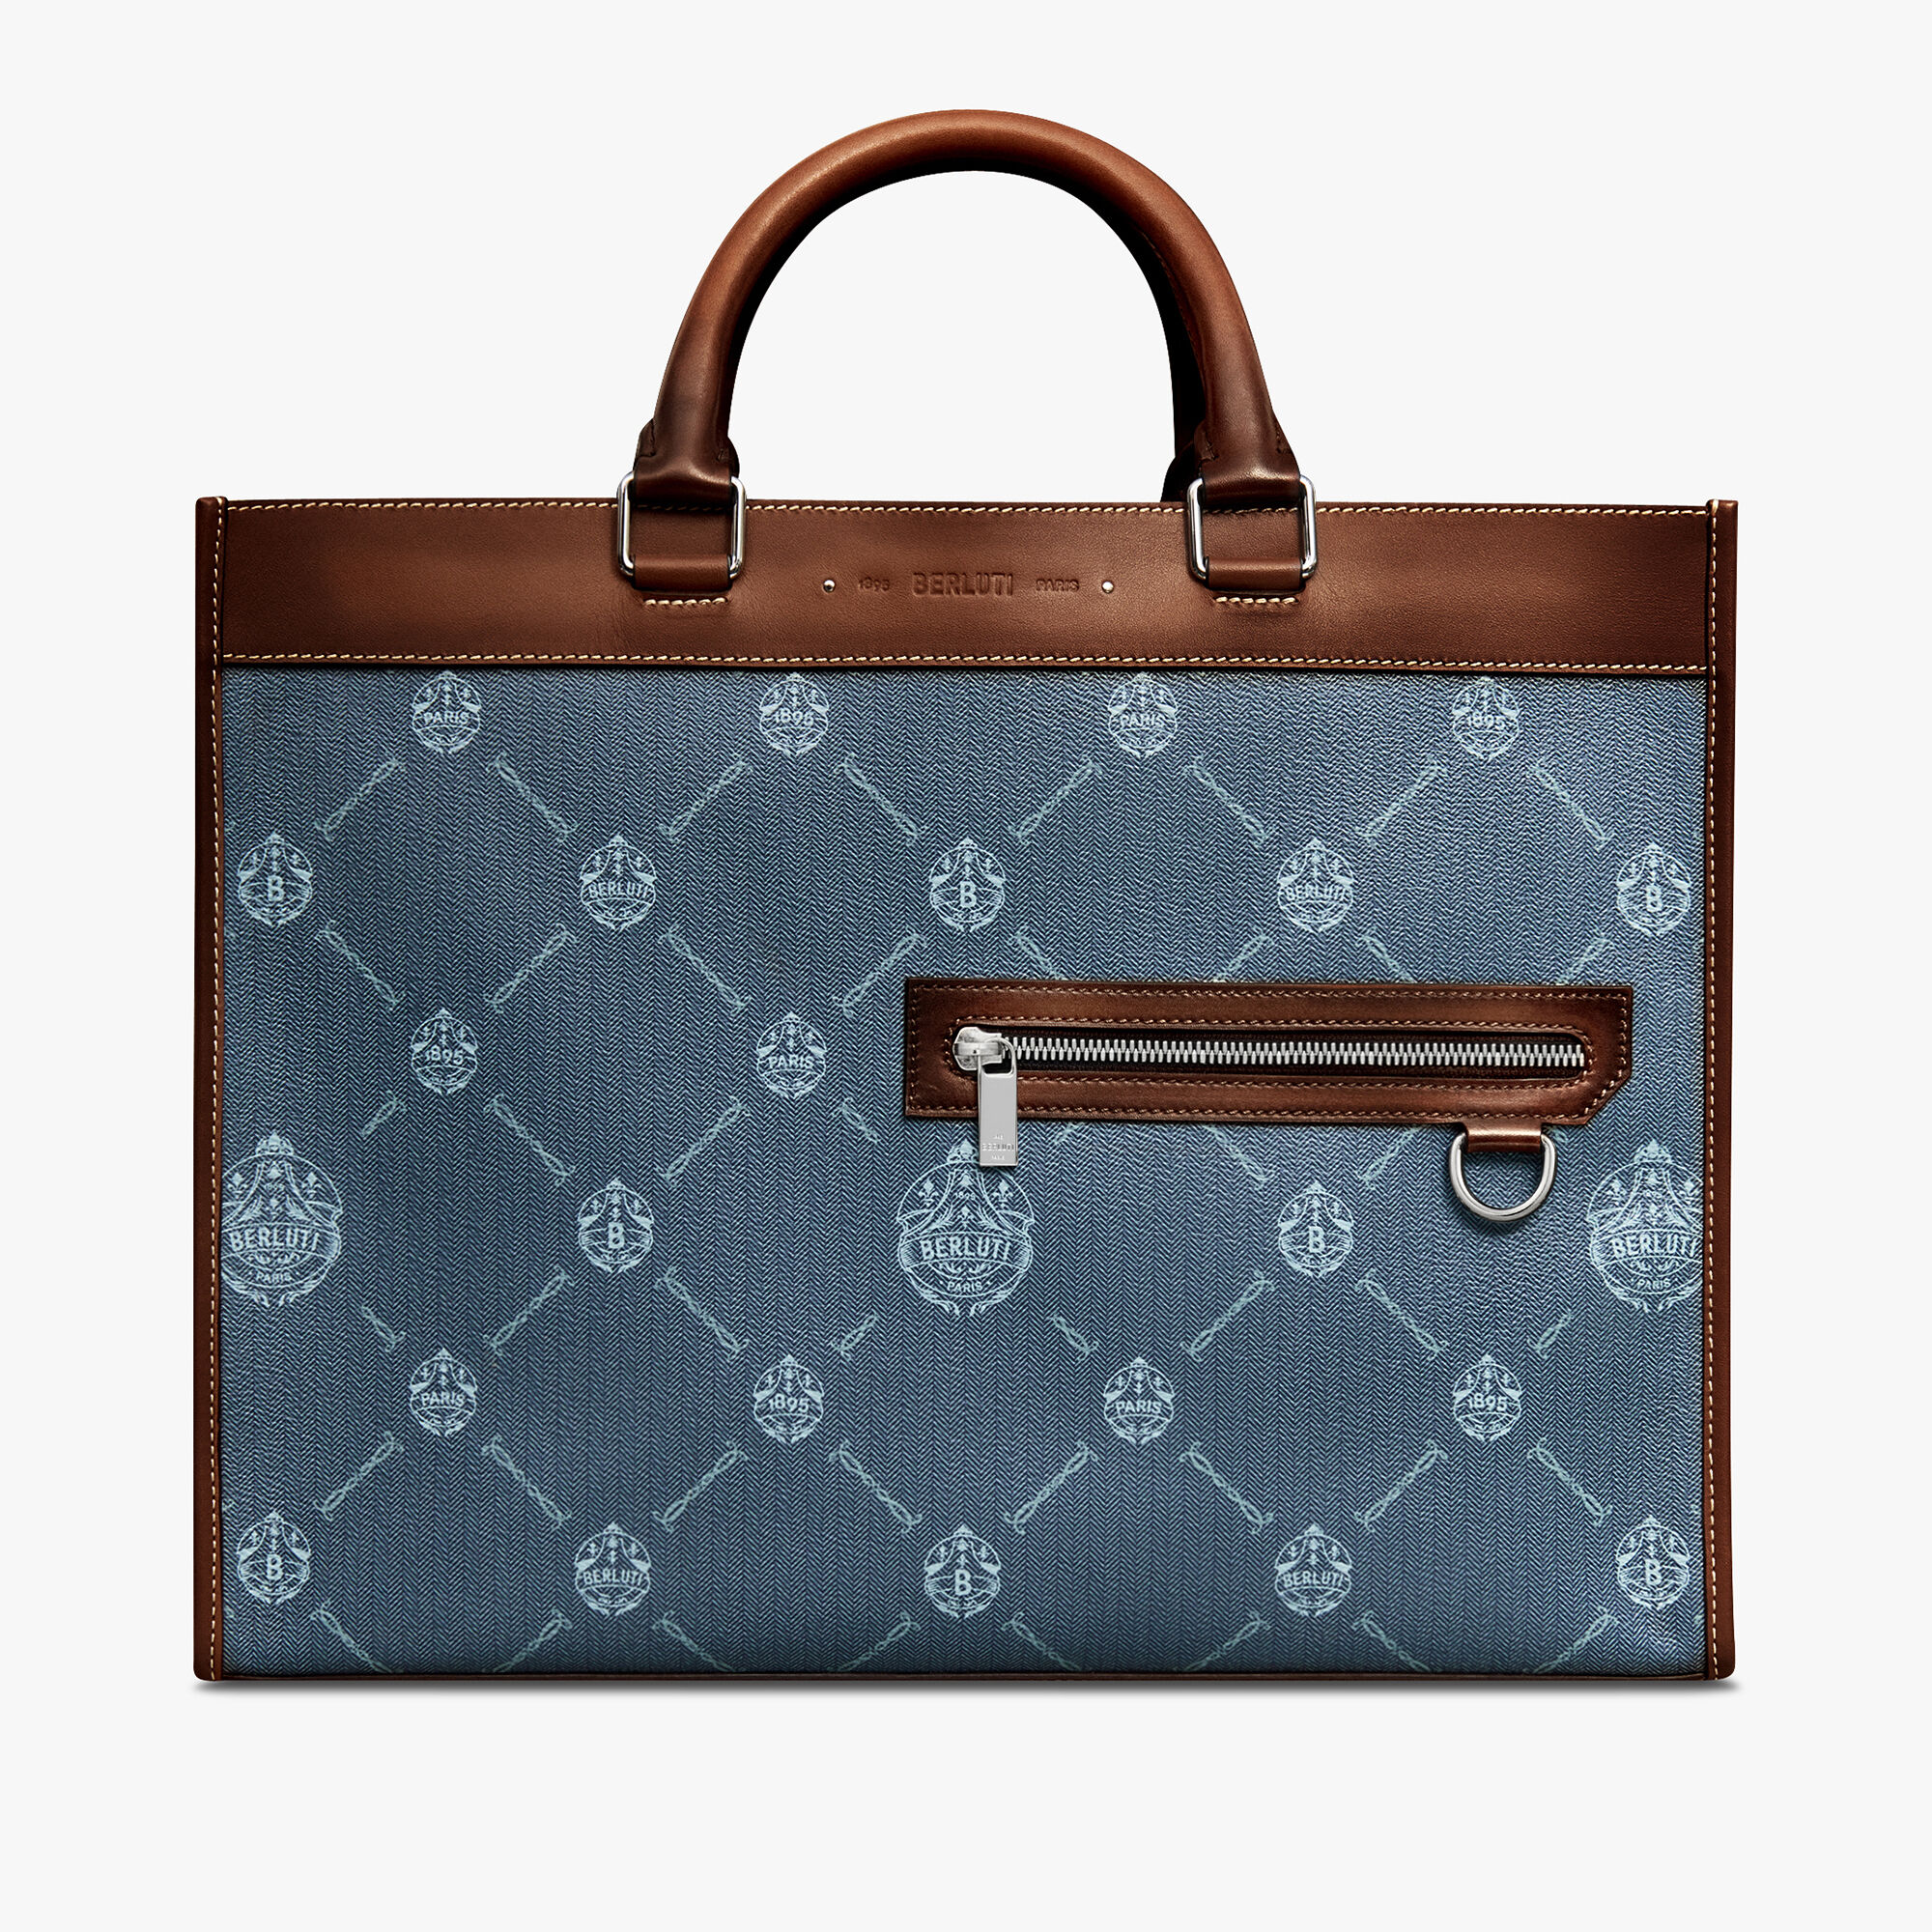 New bag collections by Berluti - US